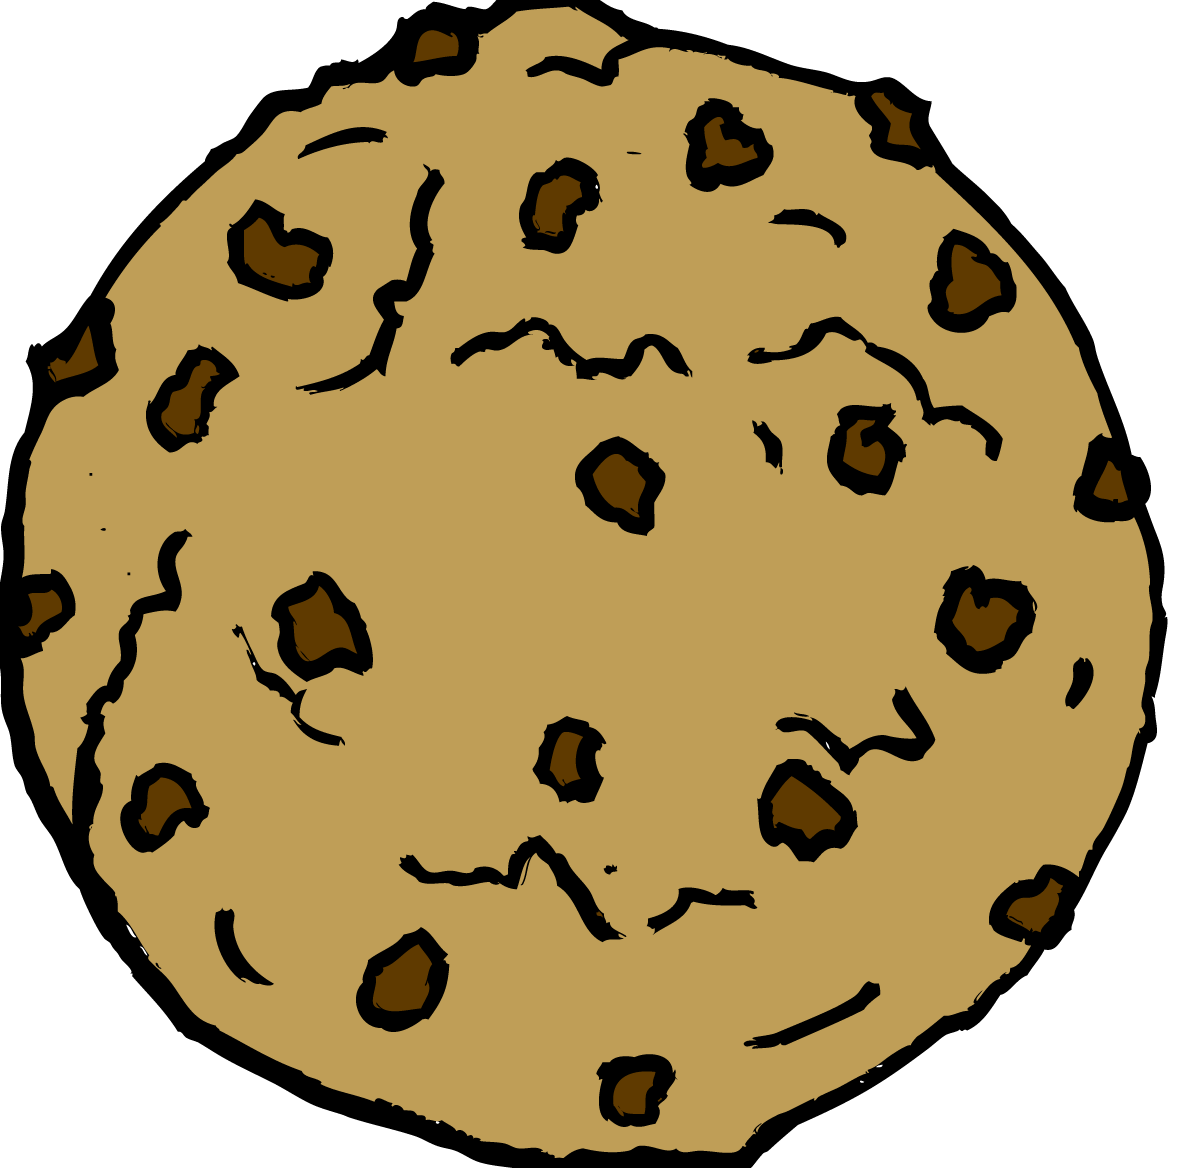 Baking cookies clipart free clip art image image